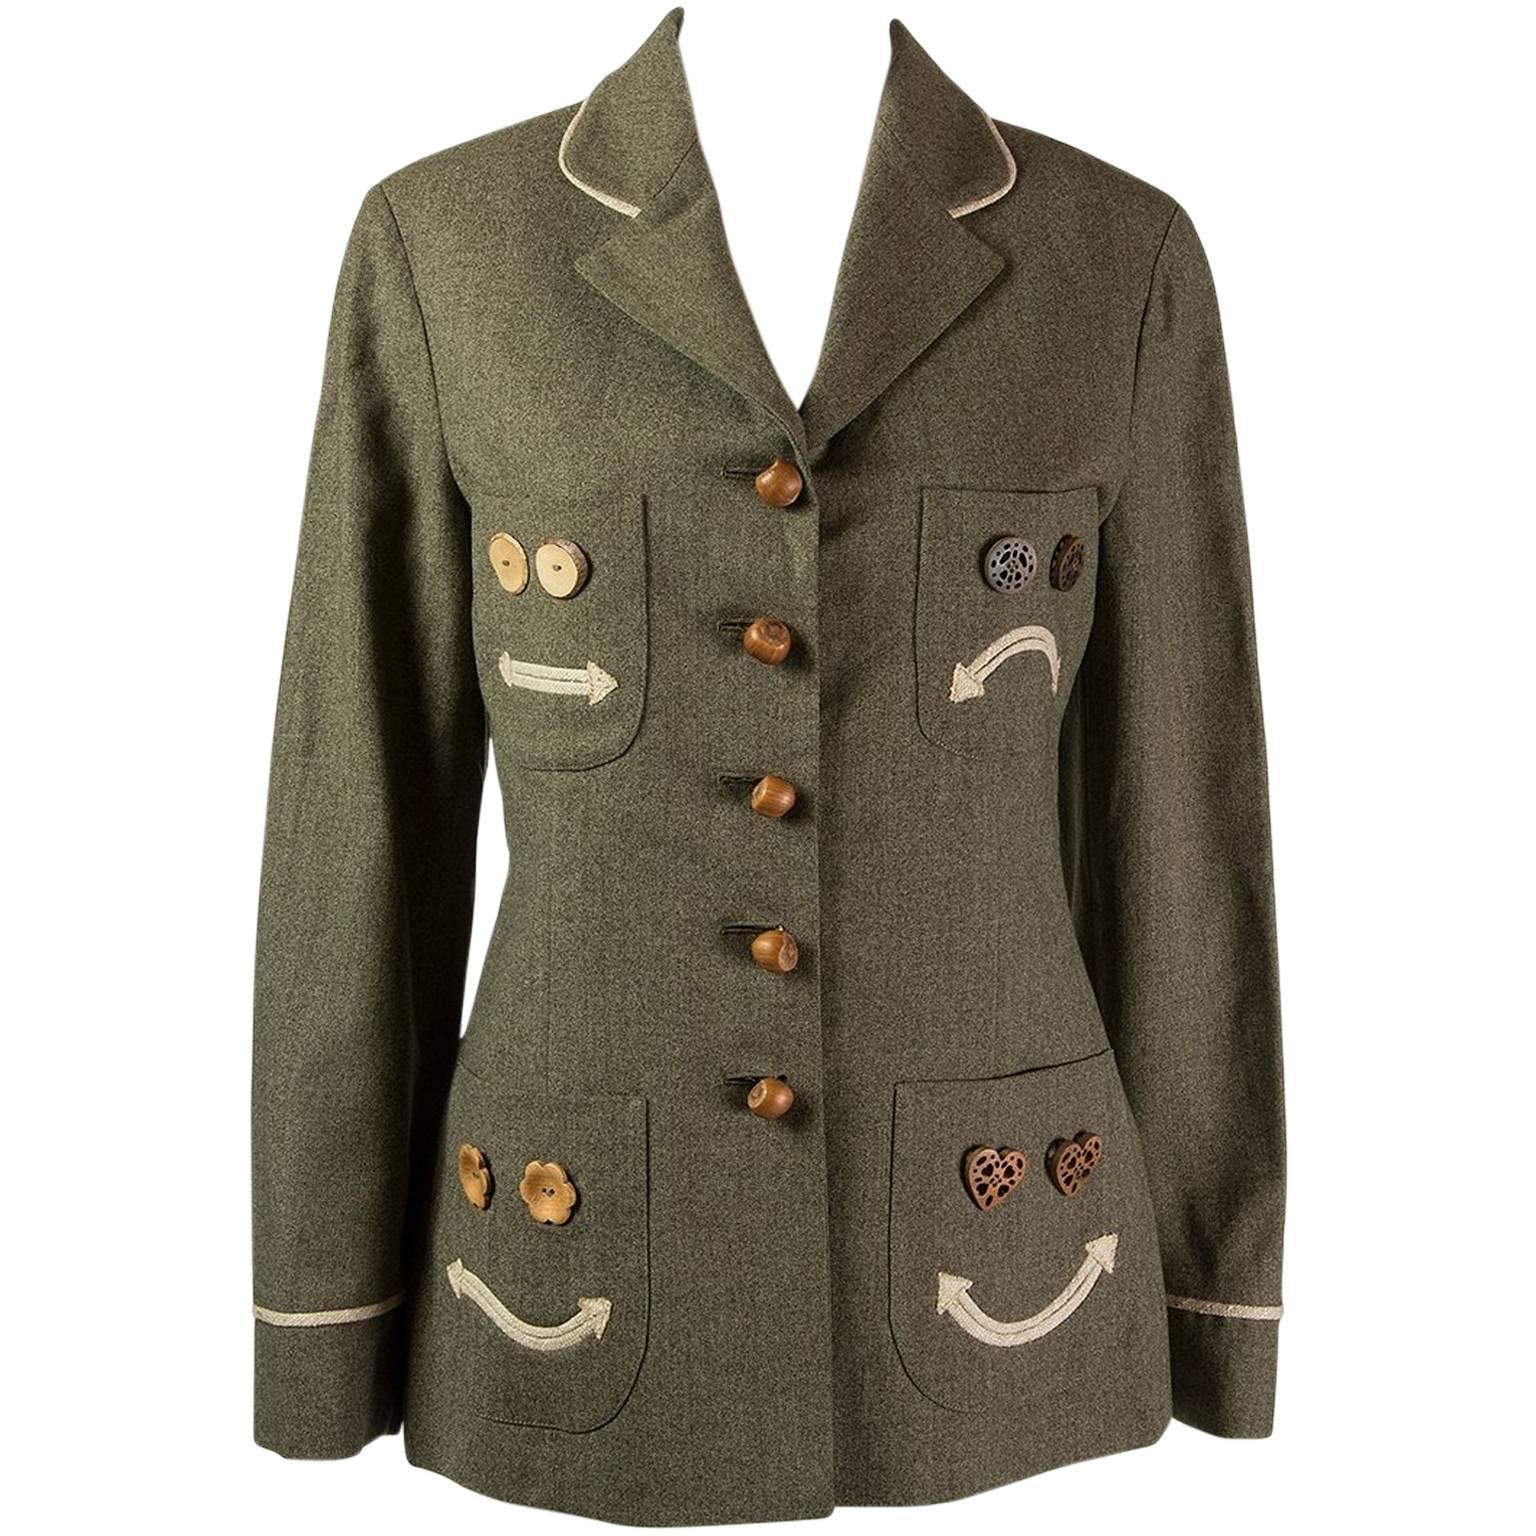 1990s Moschino Cheap And Chic "Nuts Buttons" Blazer Jacket For Sale